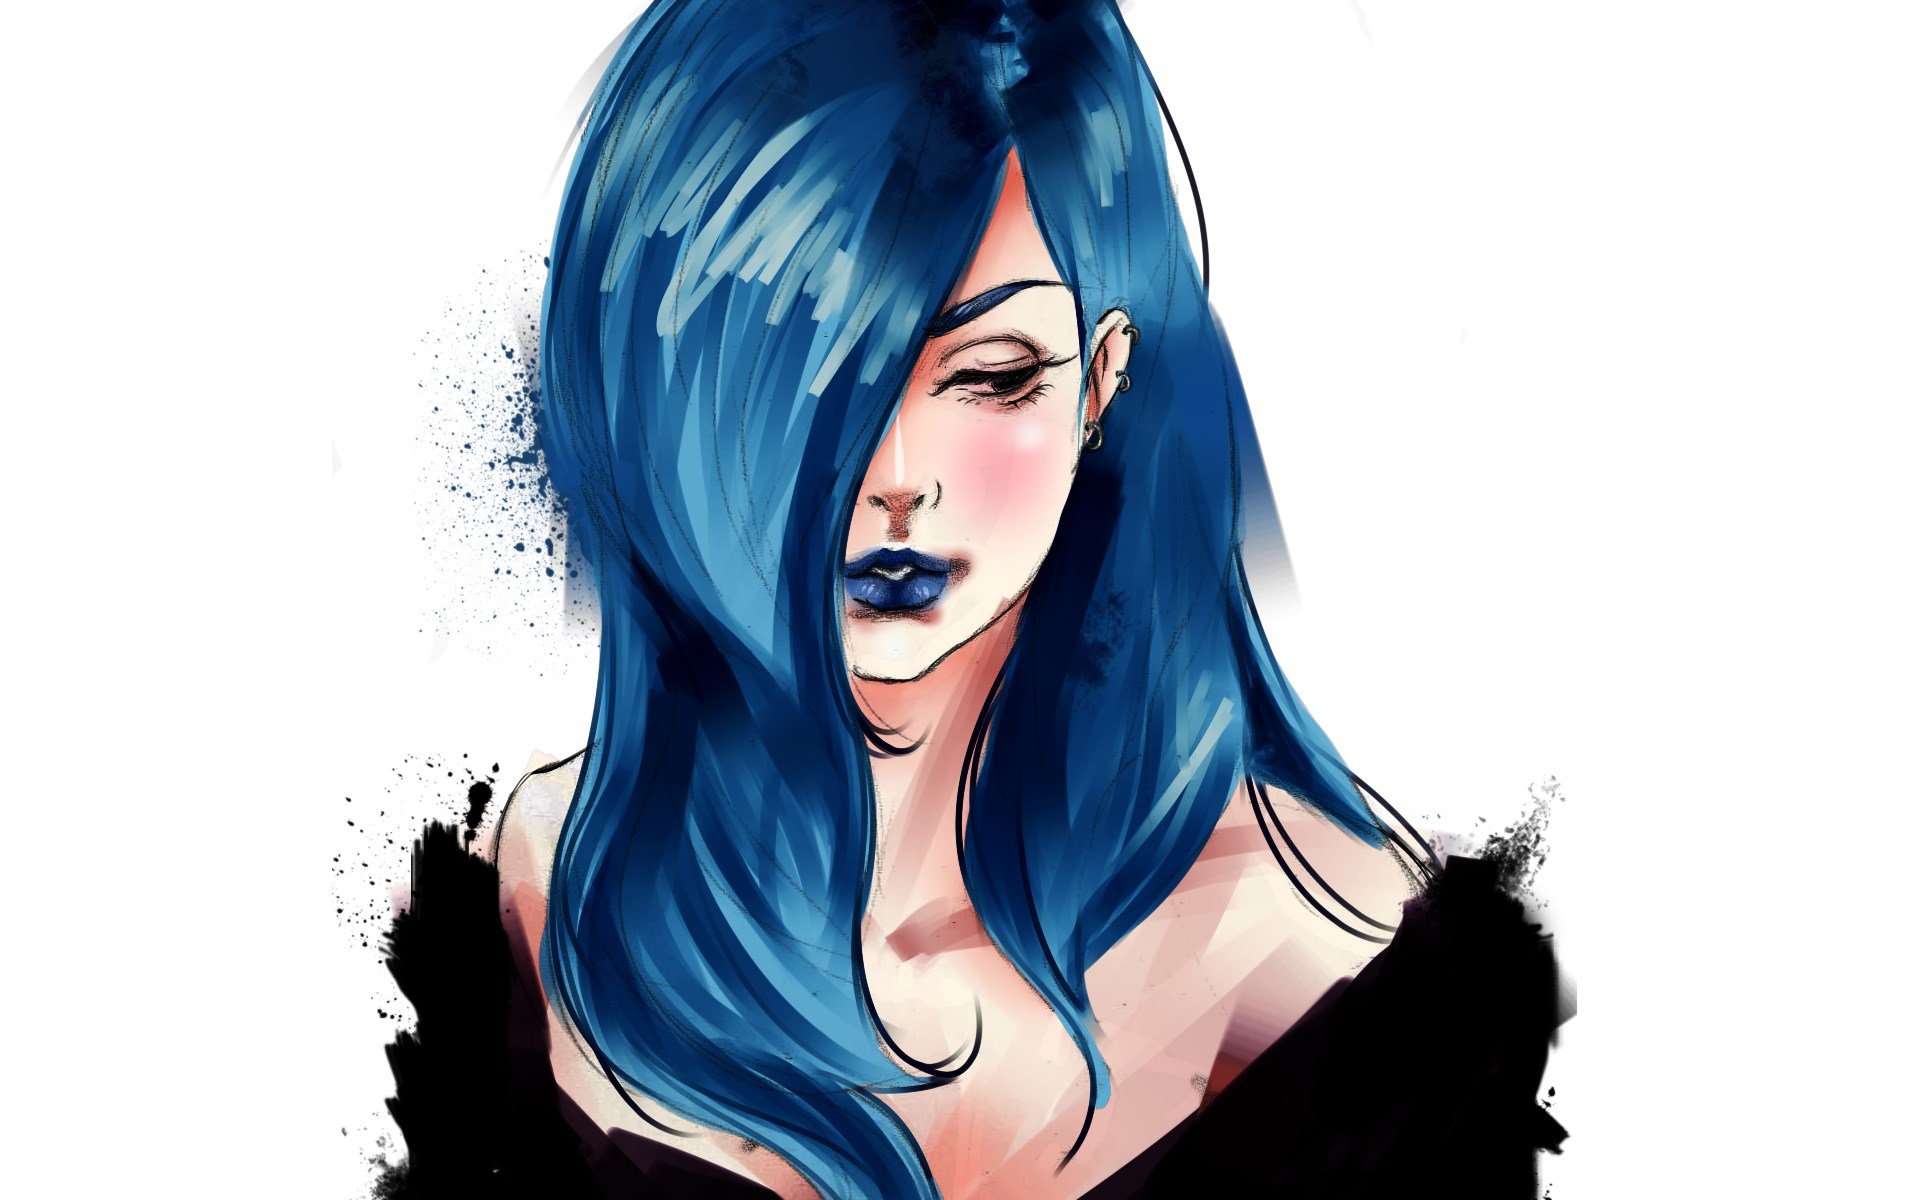 1. Blue-haired girl in Sims 4 digital art - wide 3